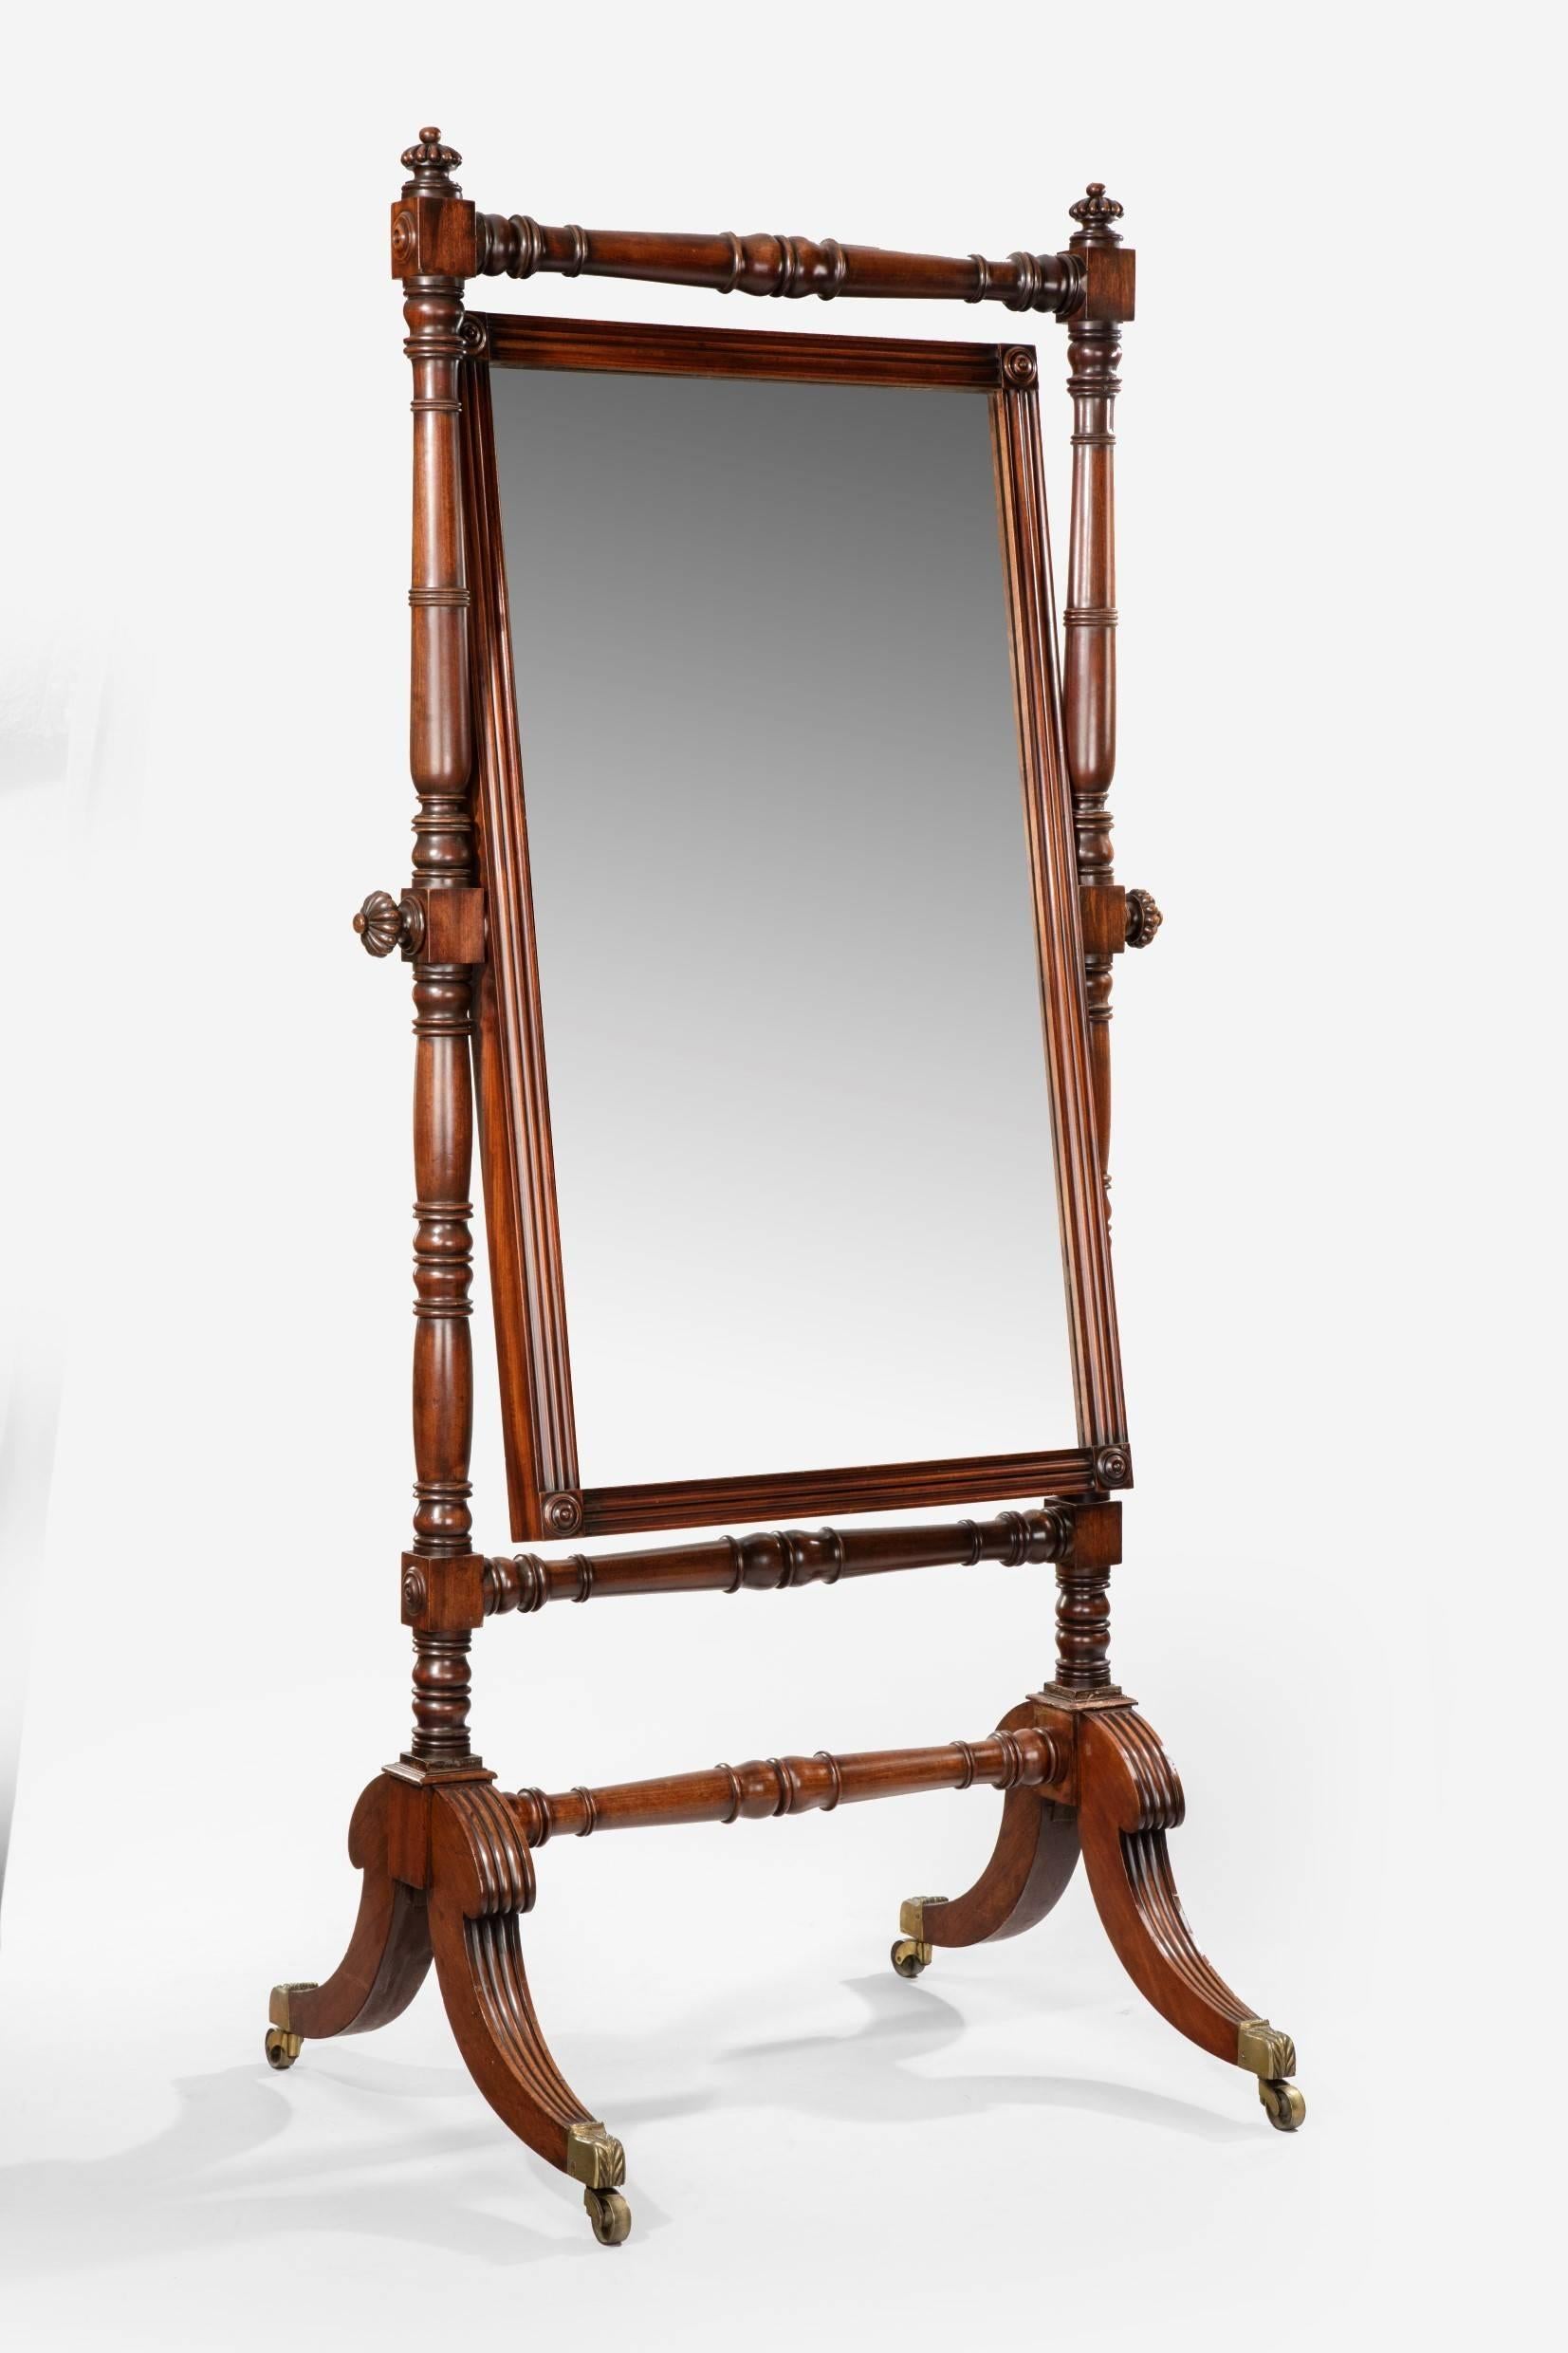 Regency cheval mirror, attributed to Gillows. Original rectangular mirror plate between turned column baluster supports joined by stretcher. On reeded cabriole legs with brass capped gilt-lacquer castors. Mahogany, circa 1815.